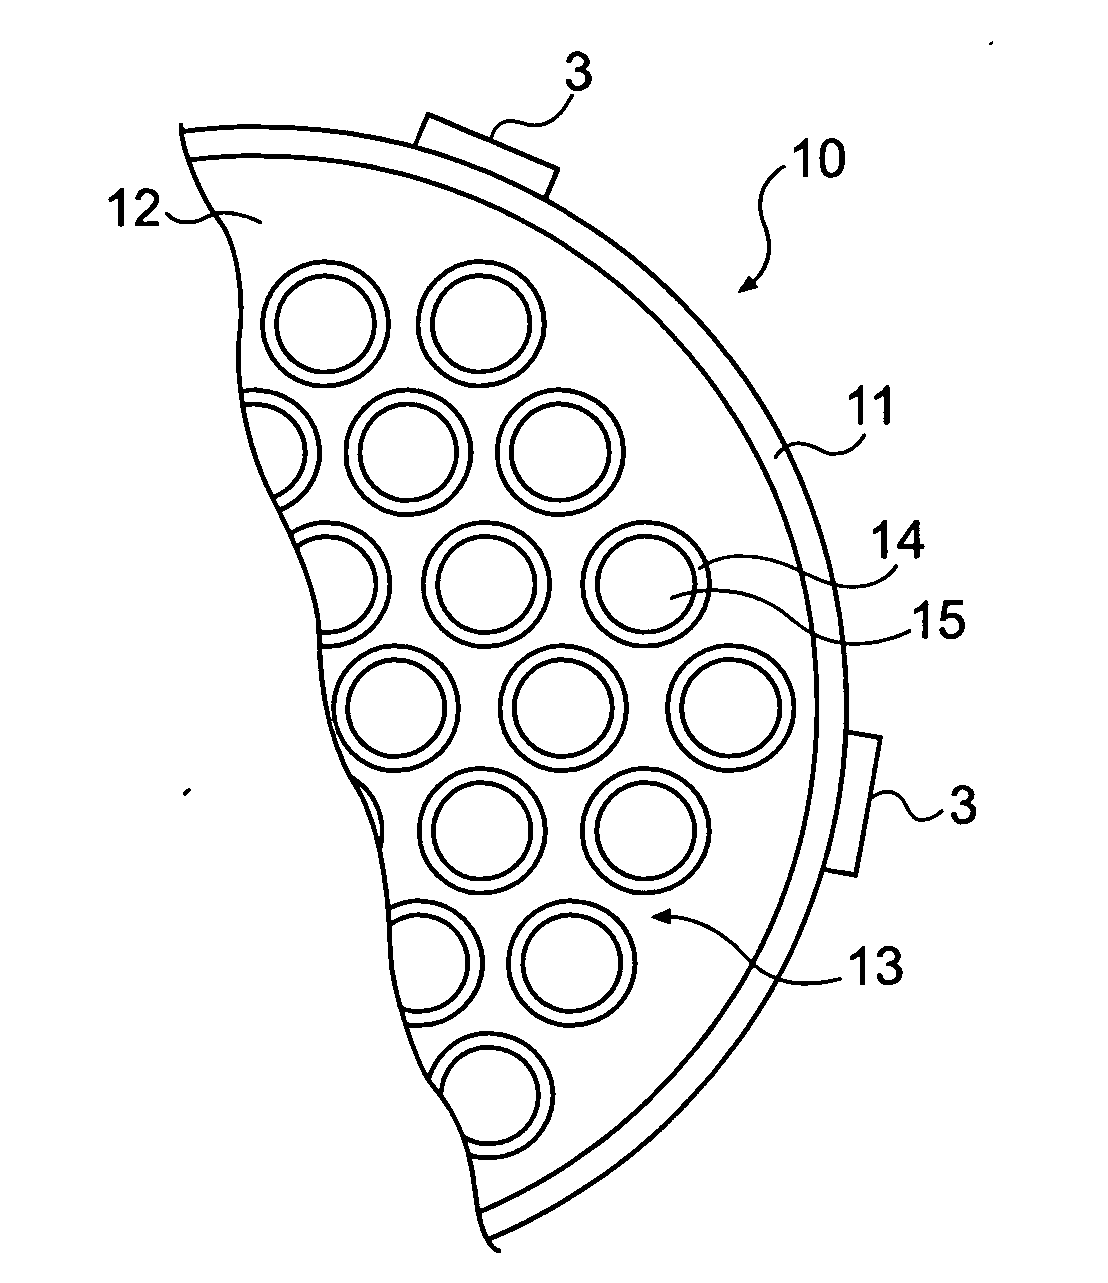 Insert and method for reducing fouling in a process stream